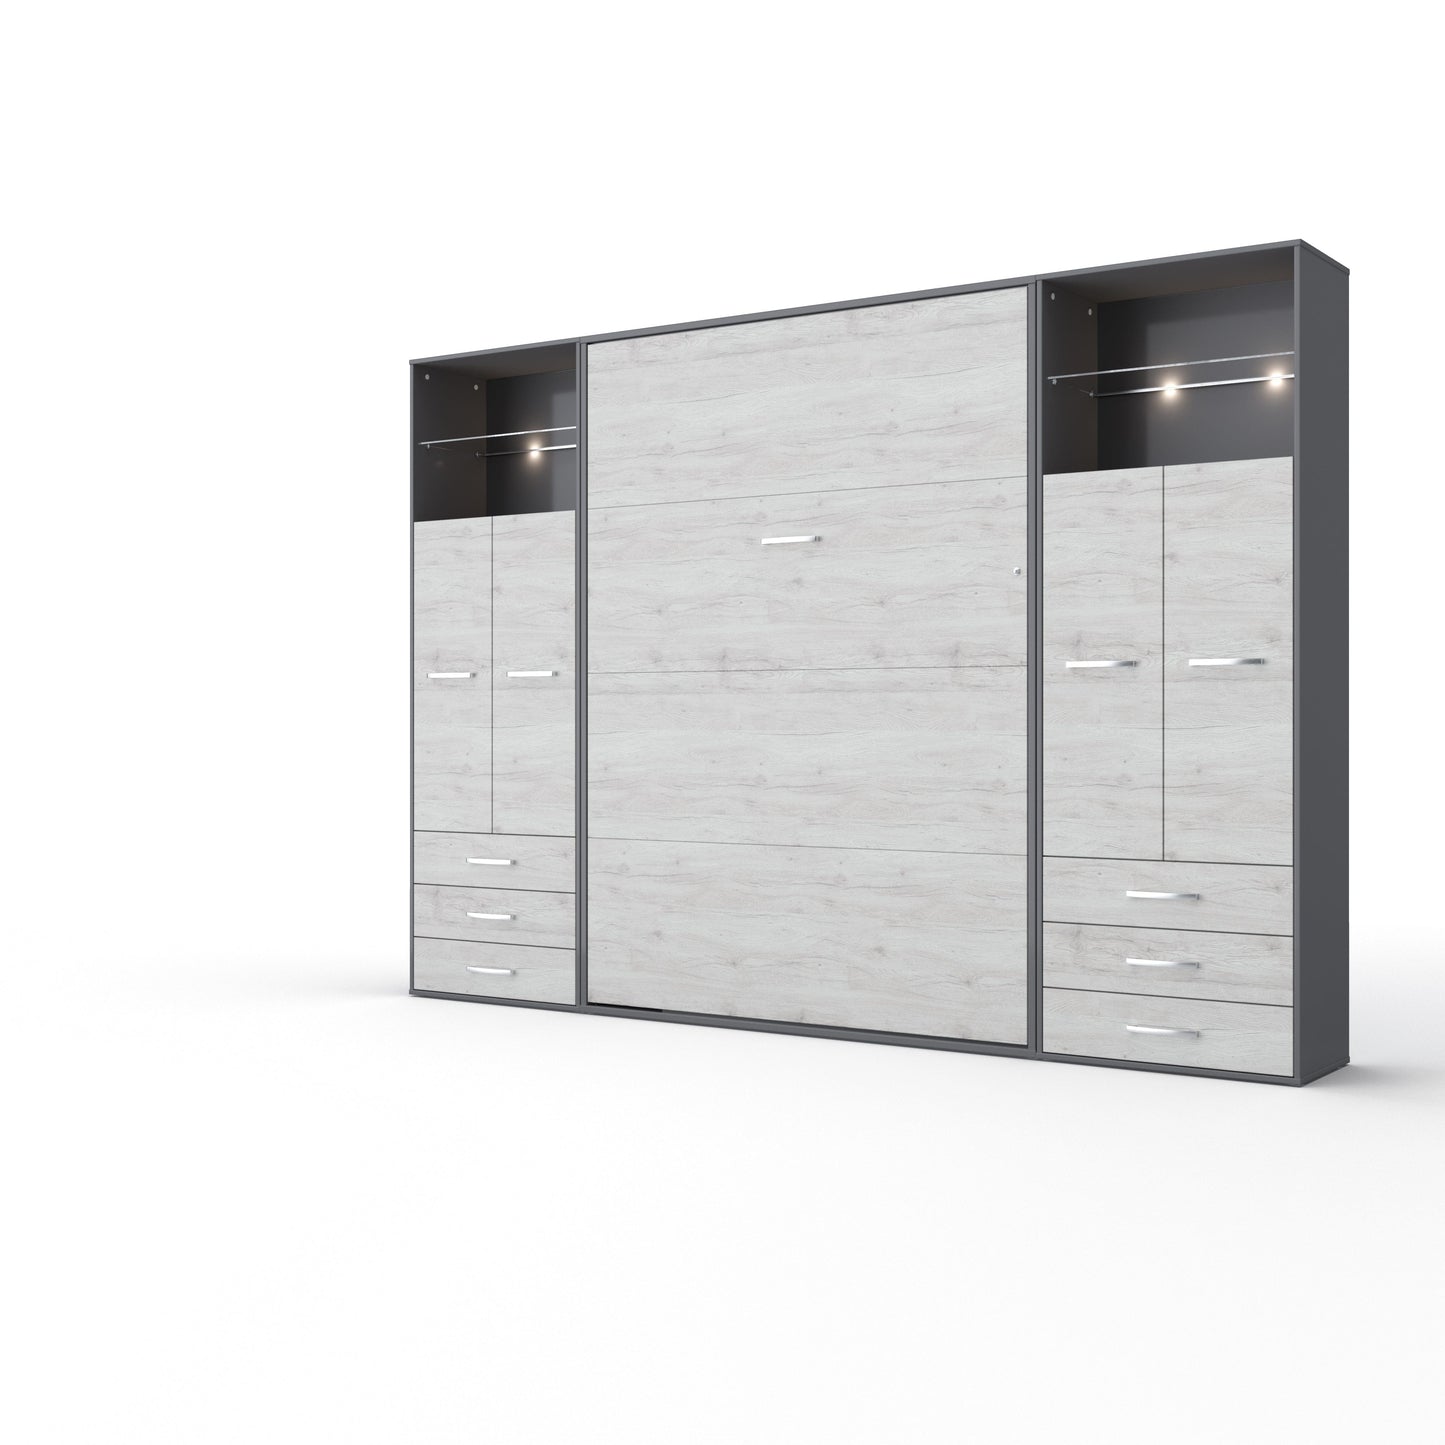 Maxima House Maxima House Vertical Wall Bed Invento, European Twin Size with 2 cabinets Grey/White Monaco IN90V-10GW